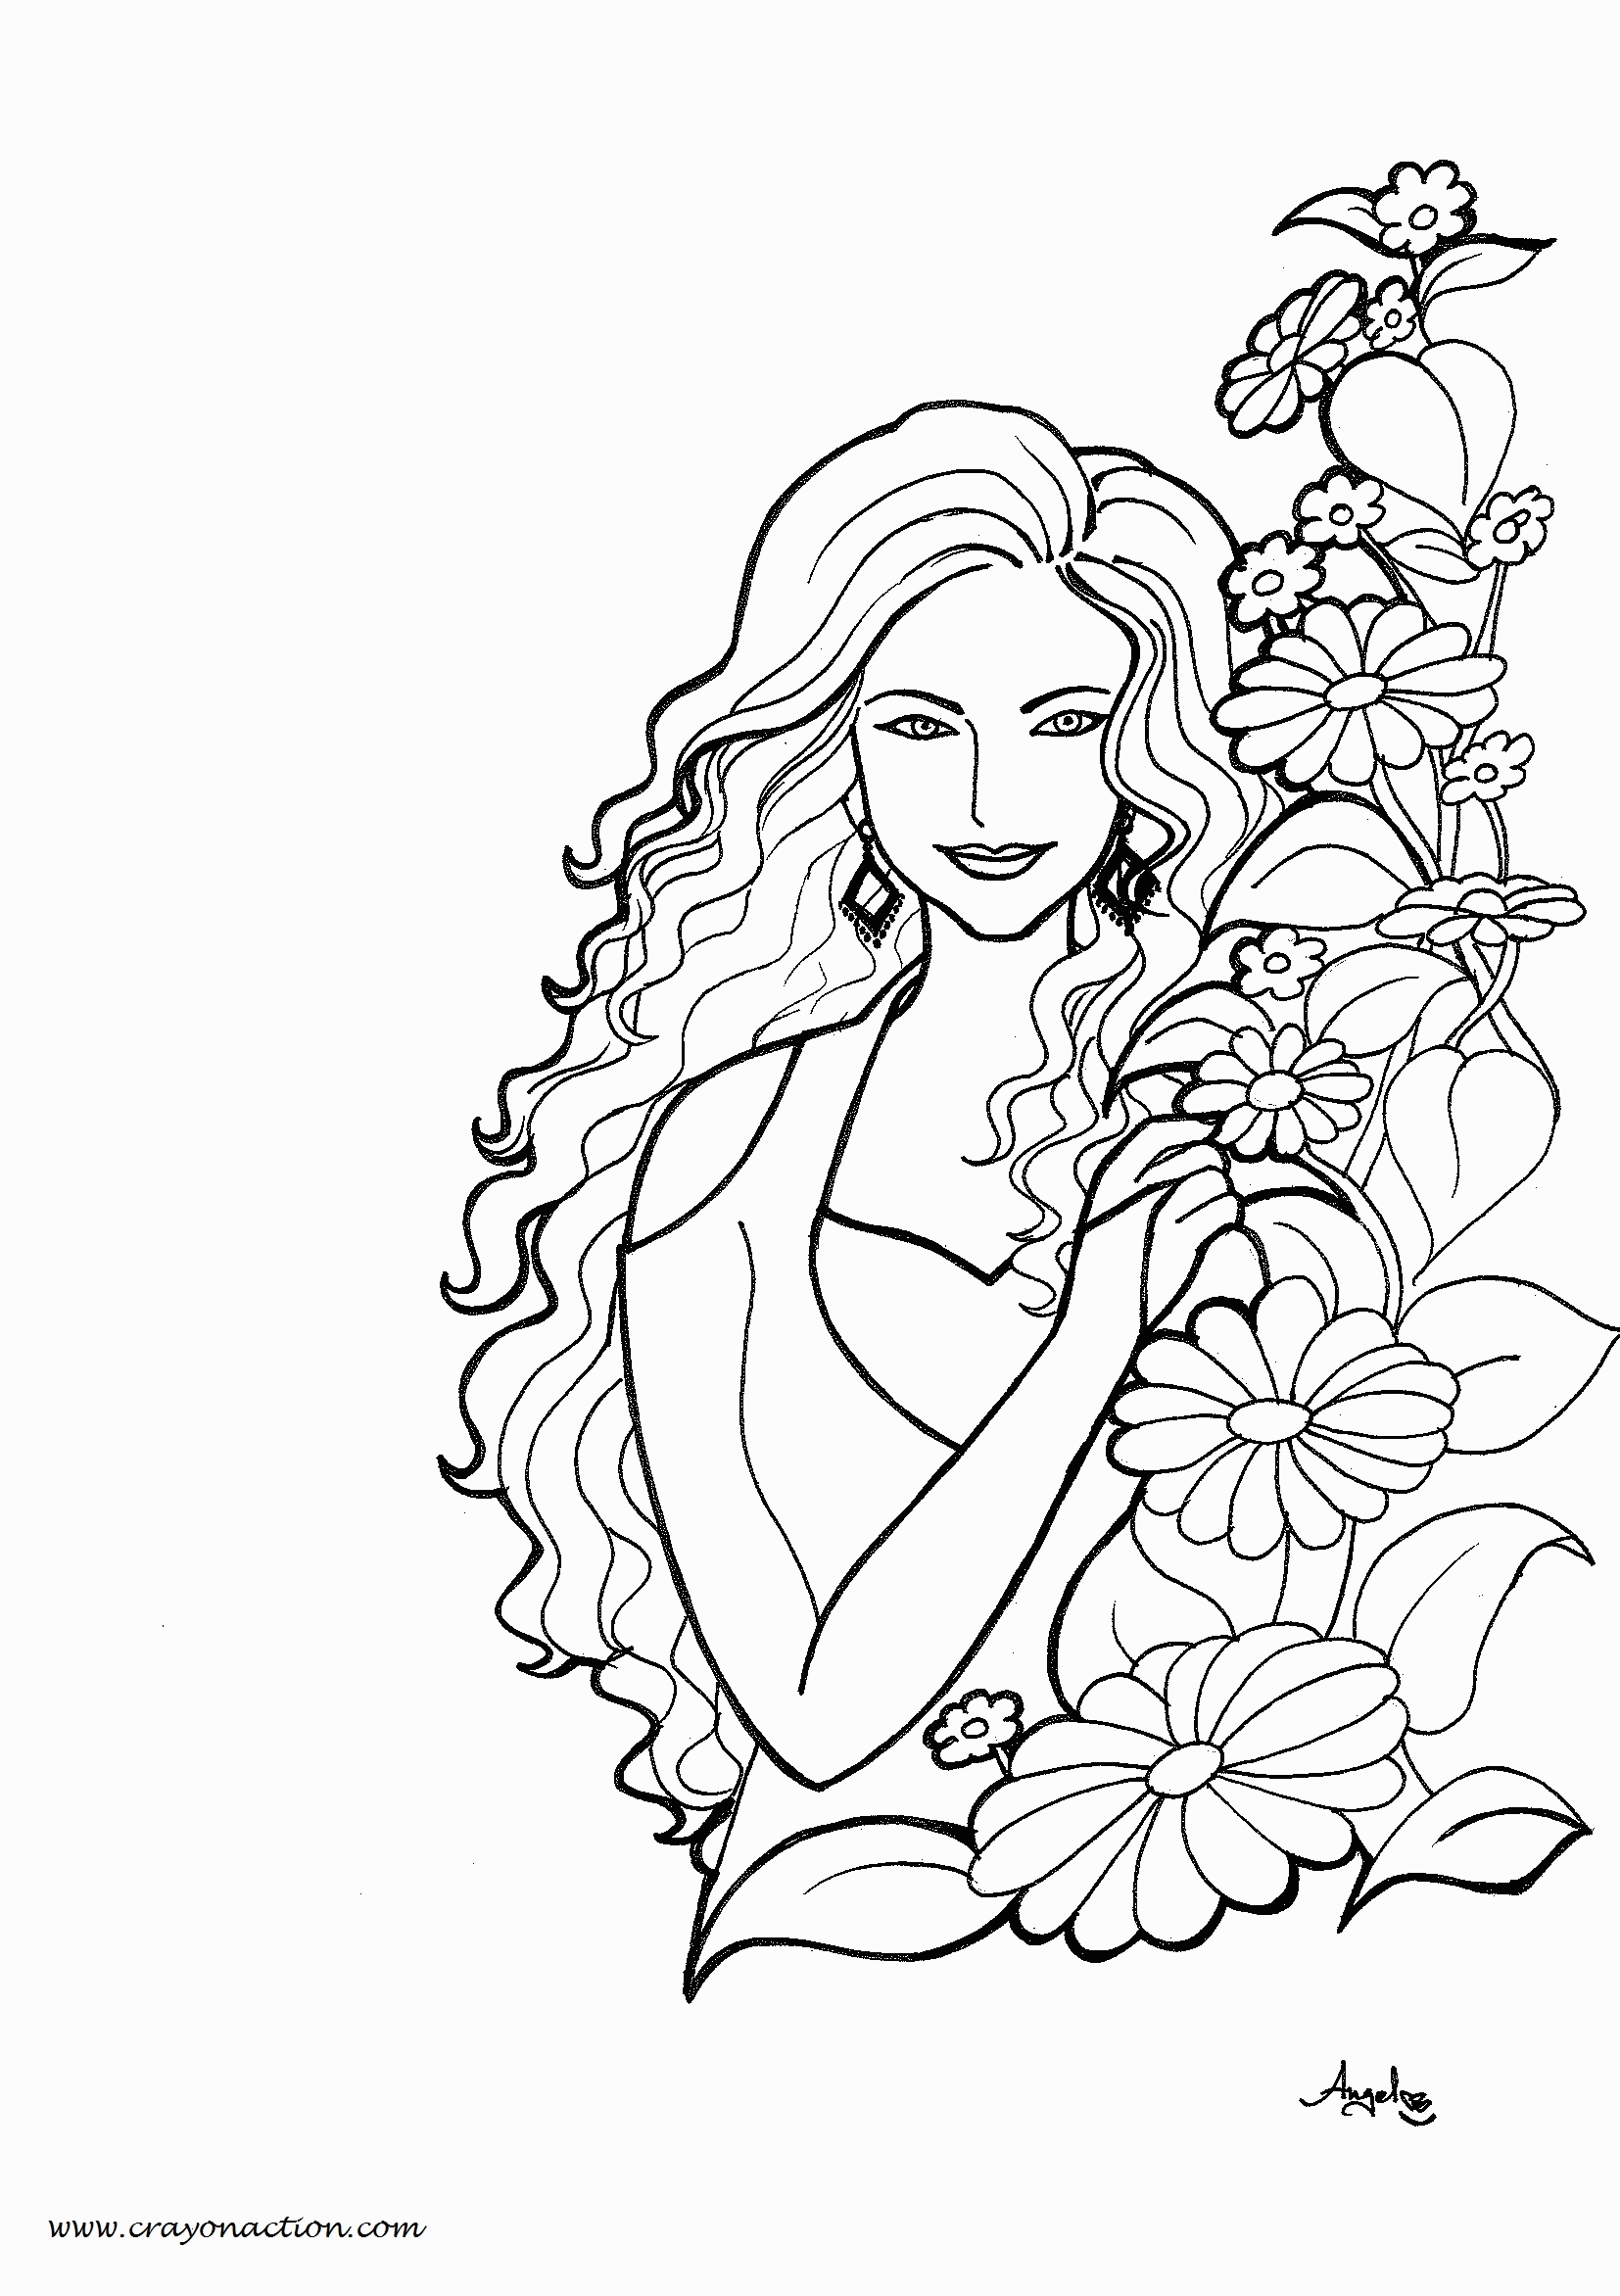 Pretty Girl Coloring Pages at GetColorings.com | Free printable